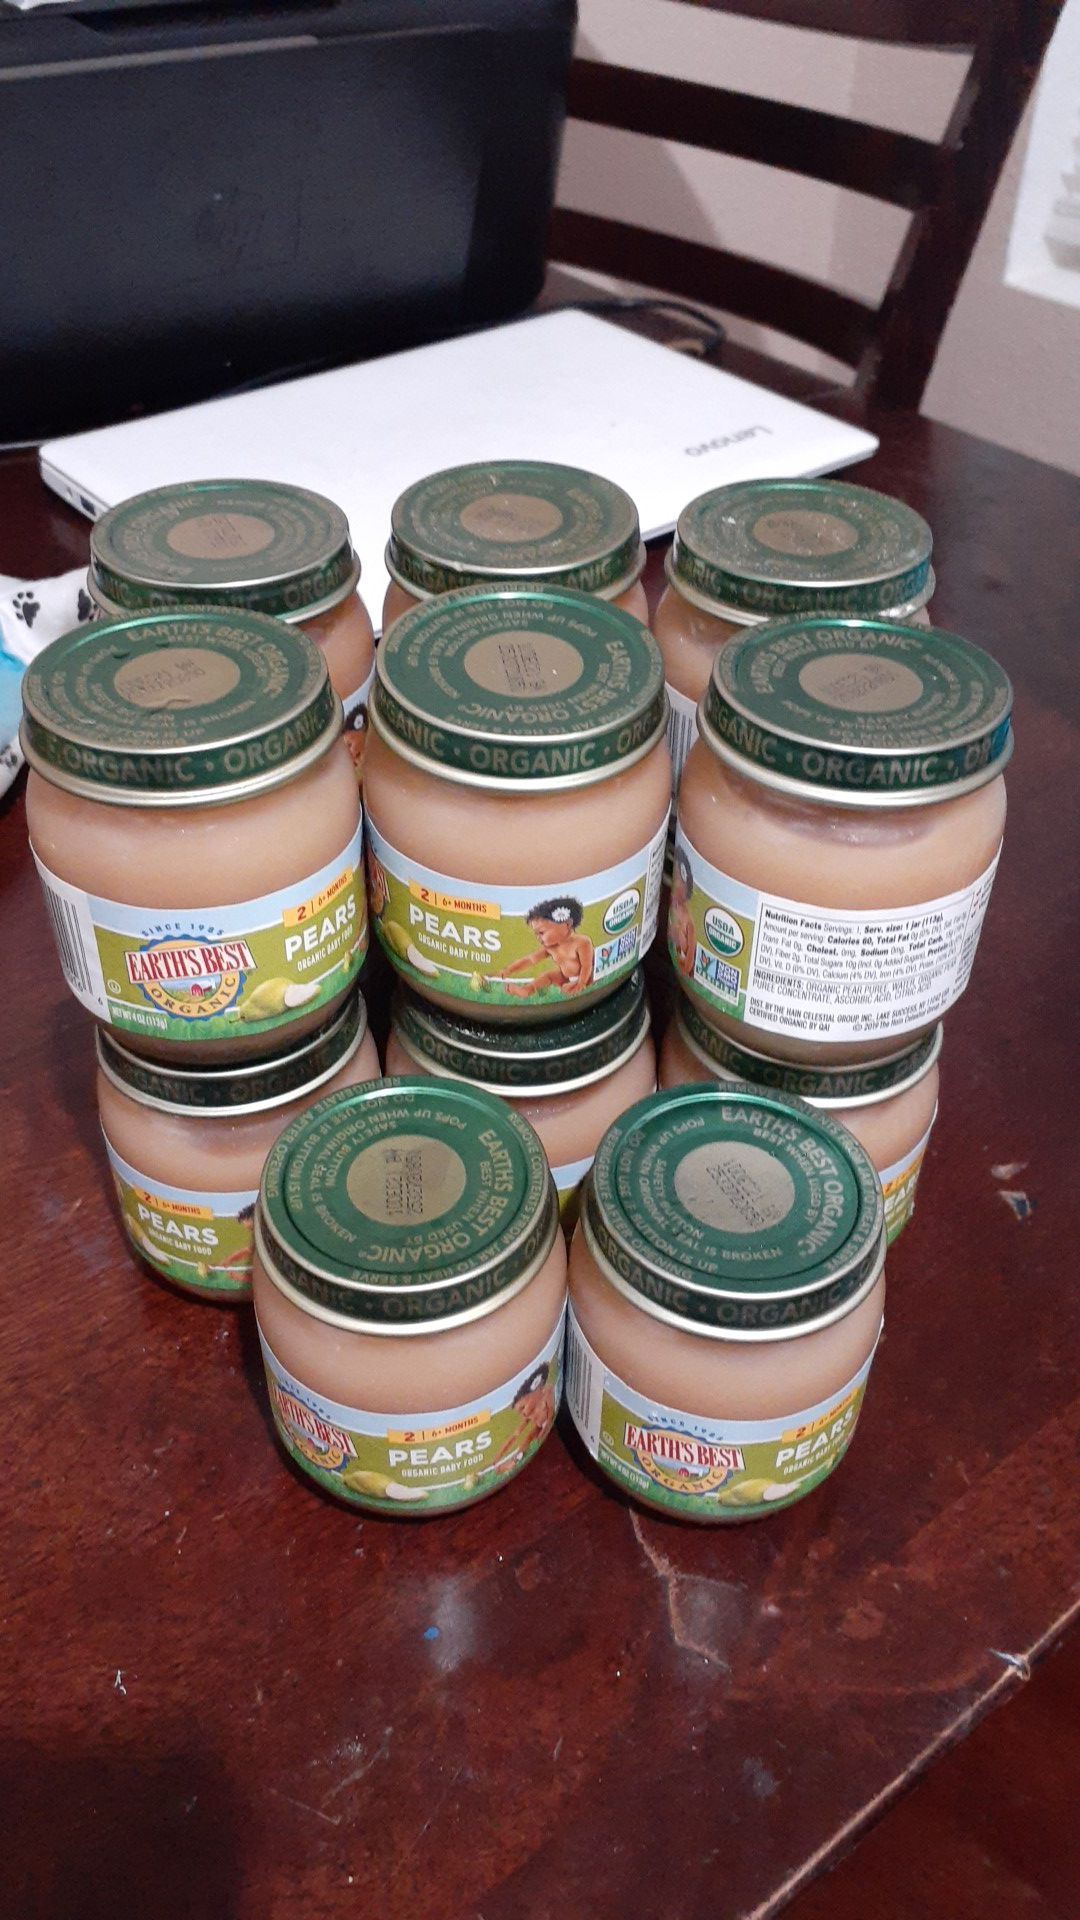 Free baby food 14 cans pear fruits exp dec 21 a21